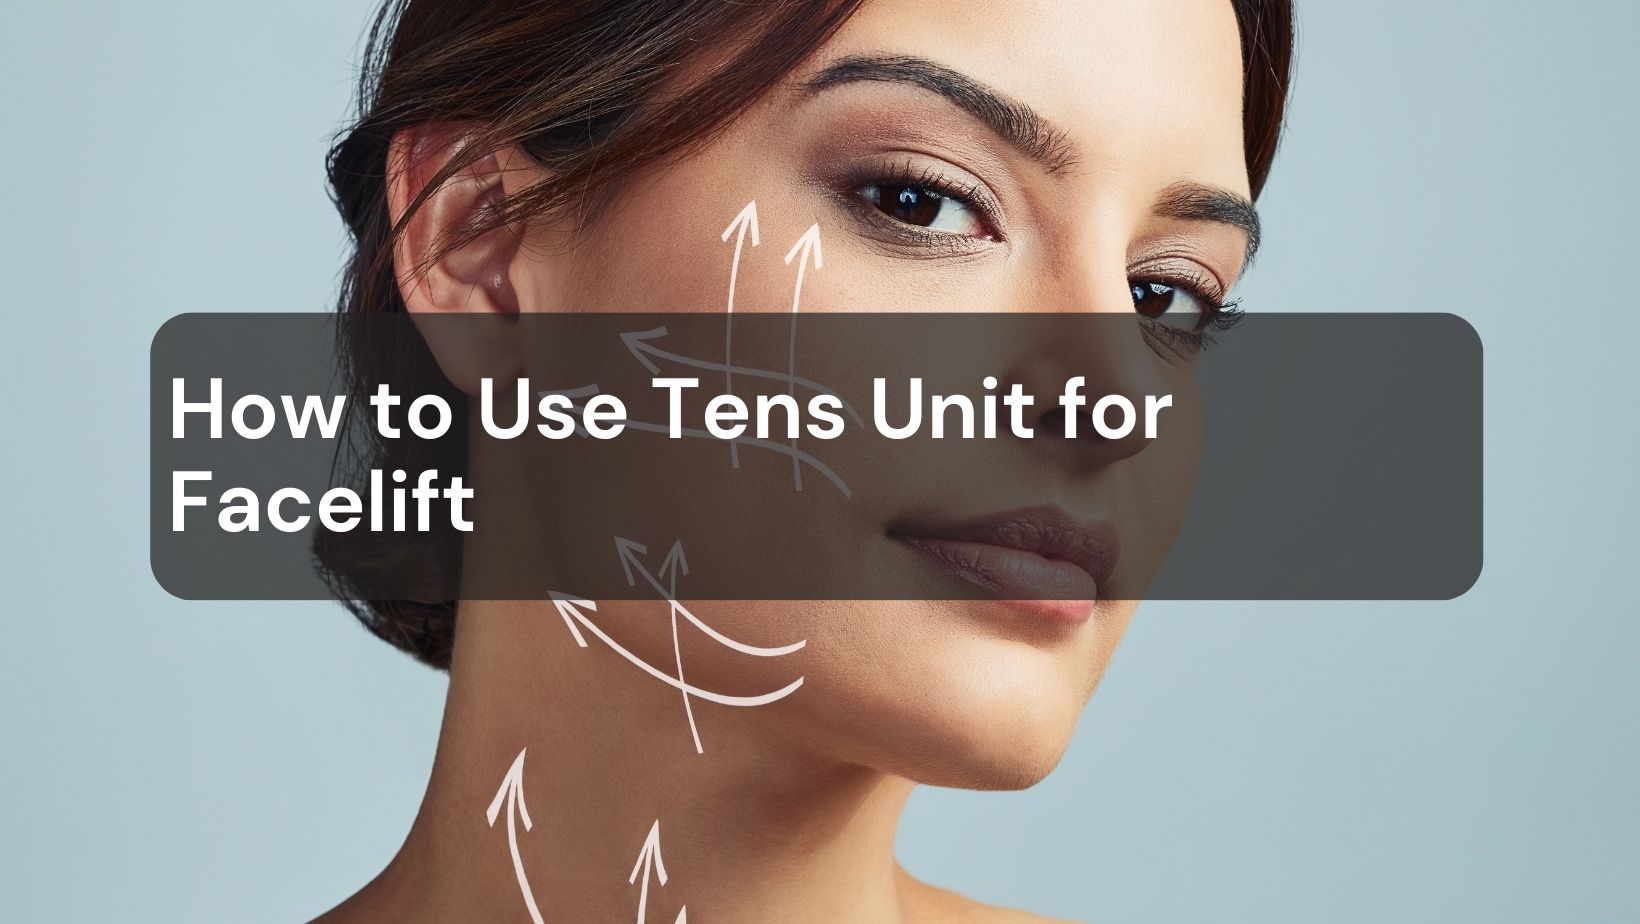 How to Use Tens Unit for Facelift